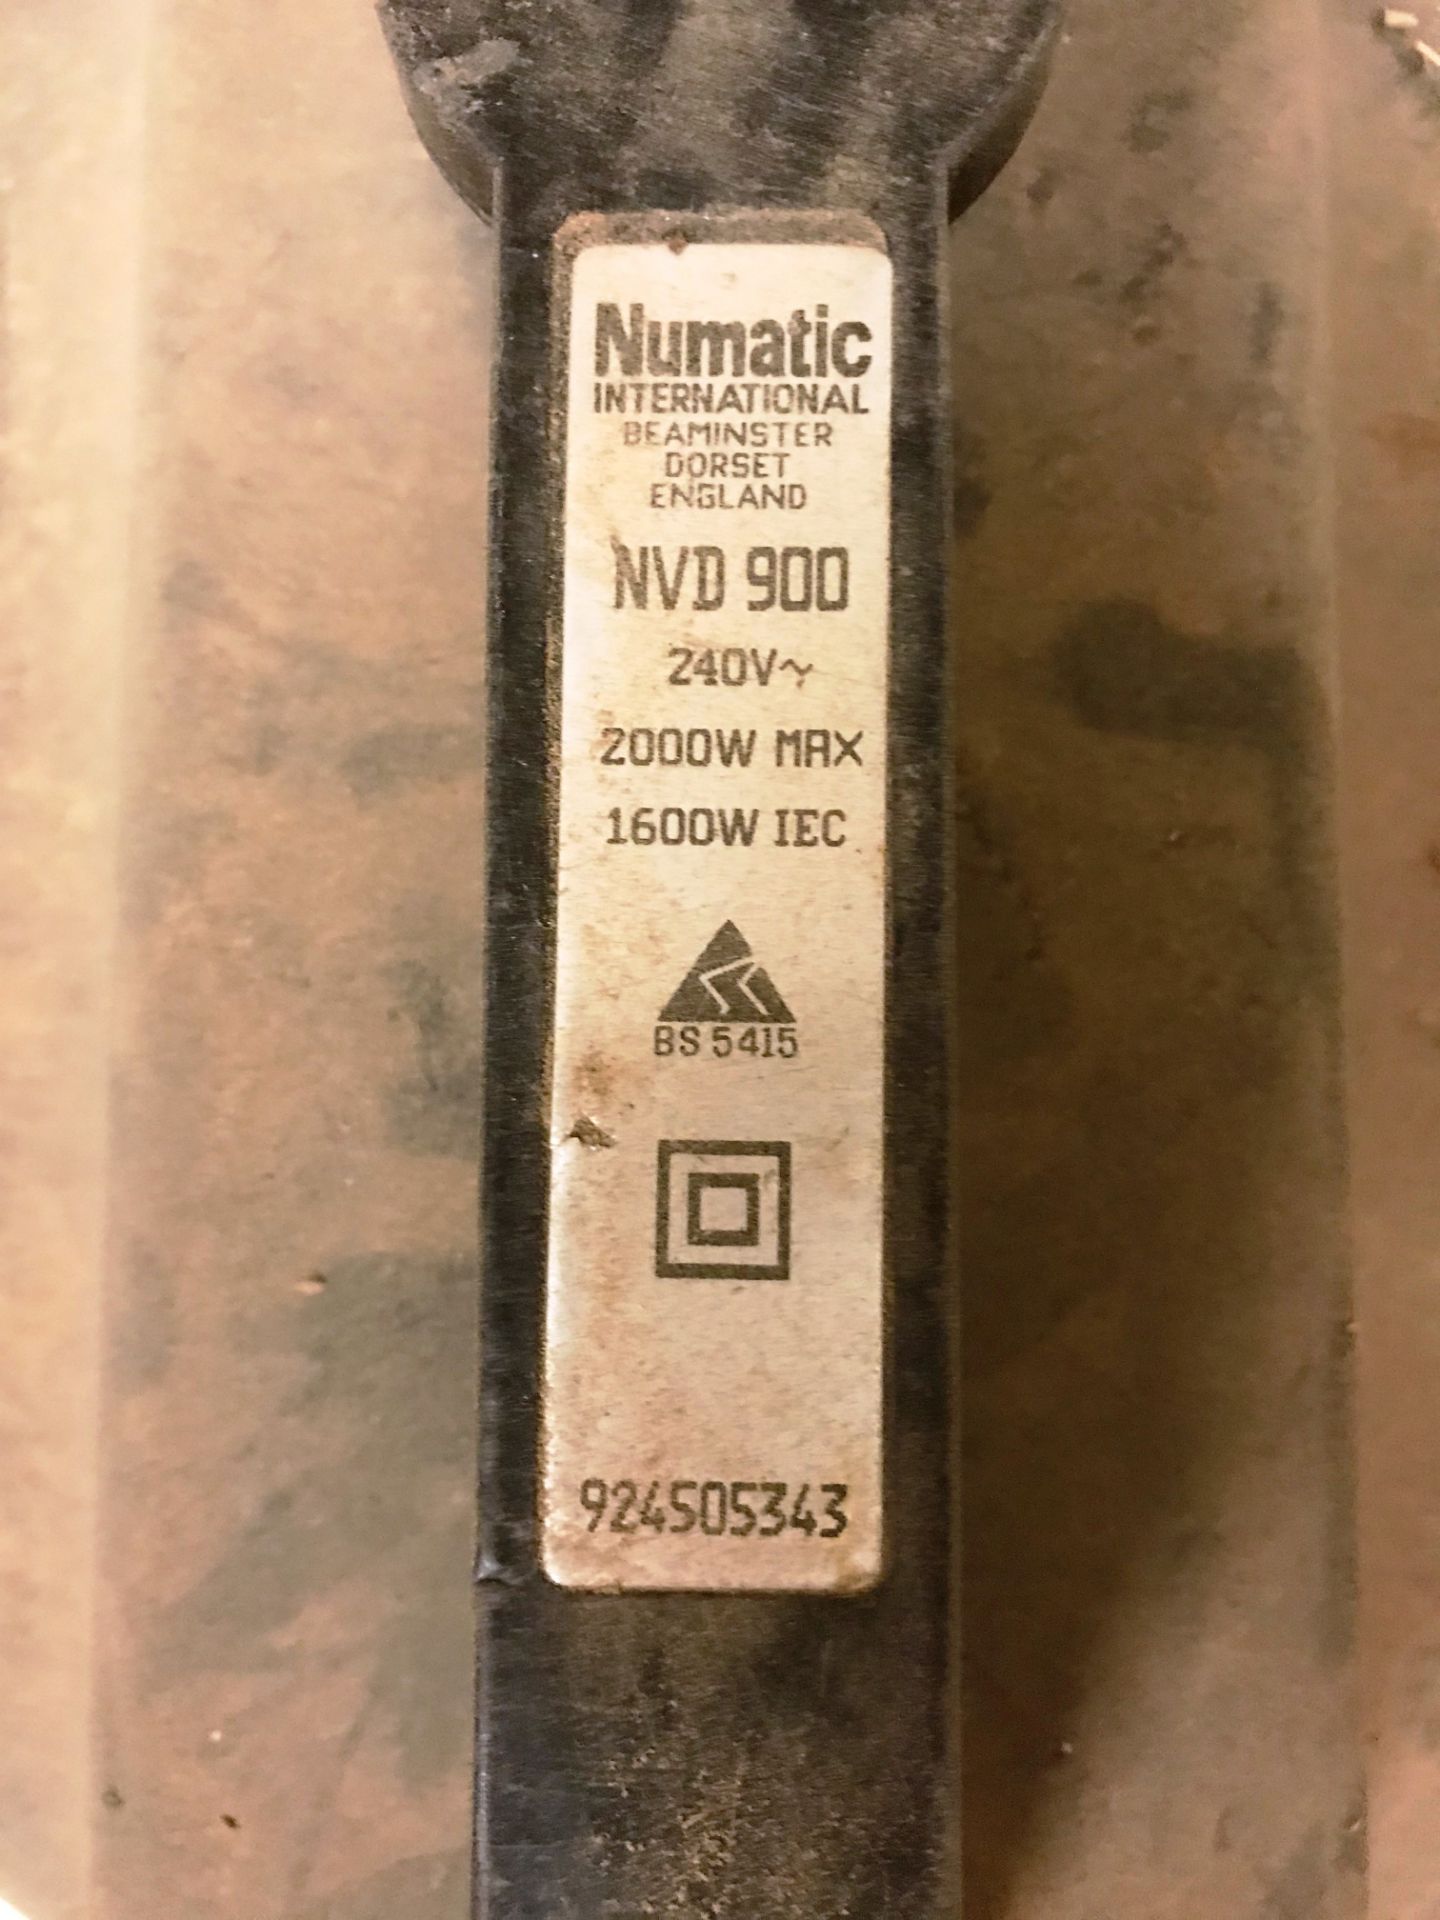 Numatic NVD 900 Industrial Vacuum Cleaner | 240V - Image 2 of 2